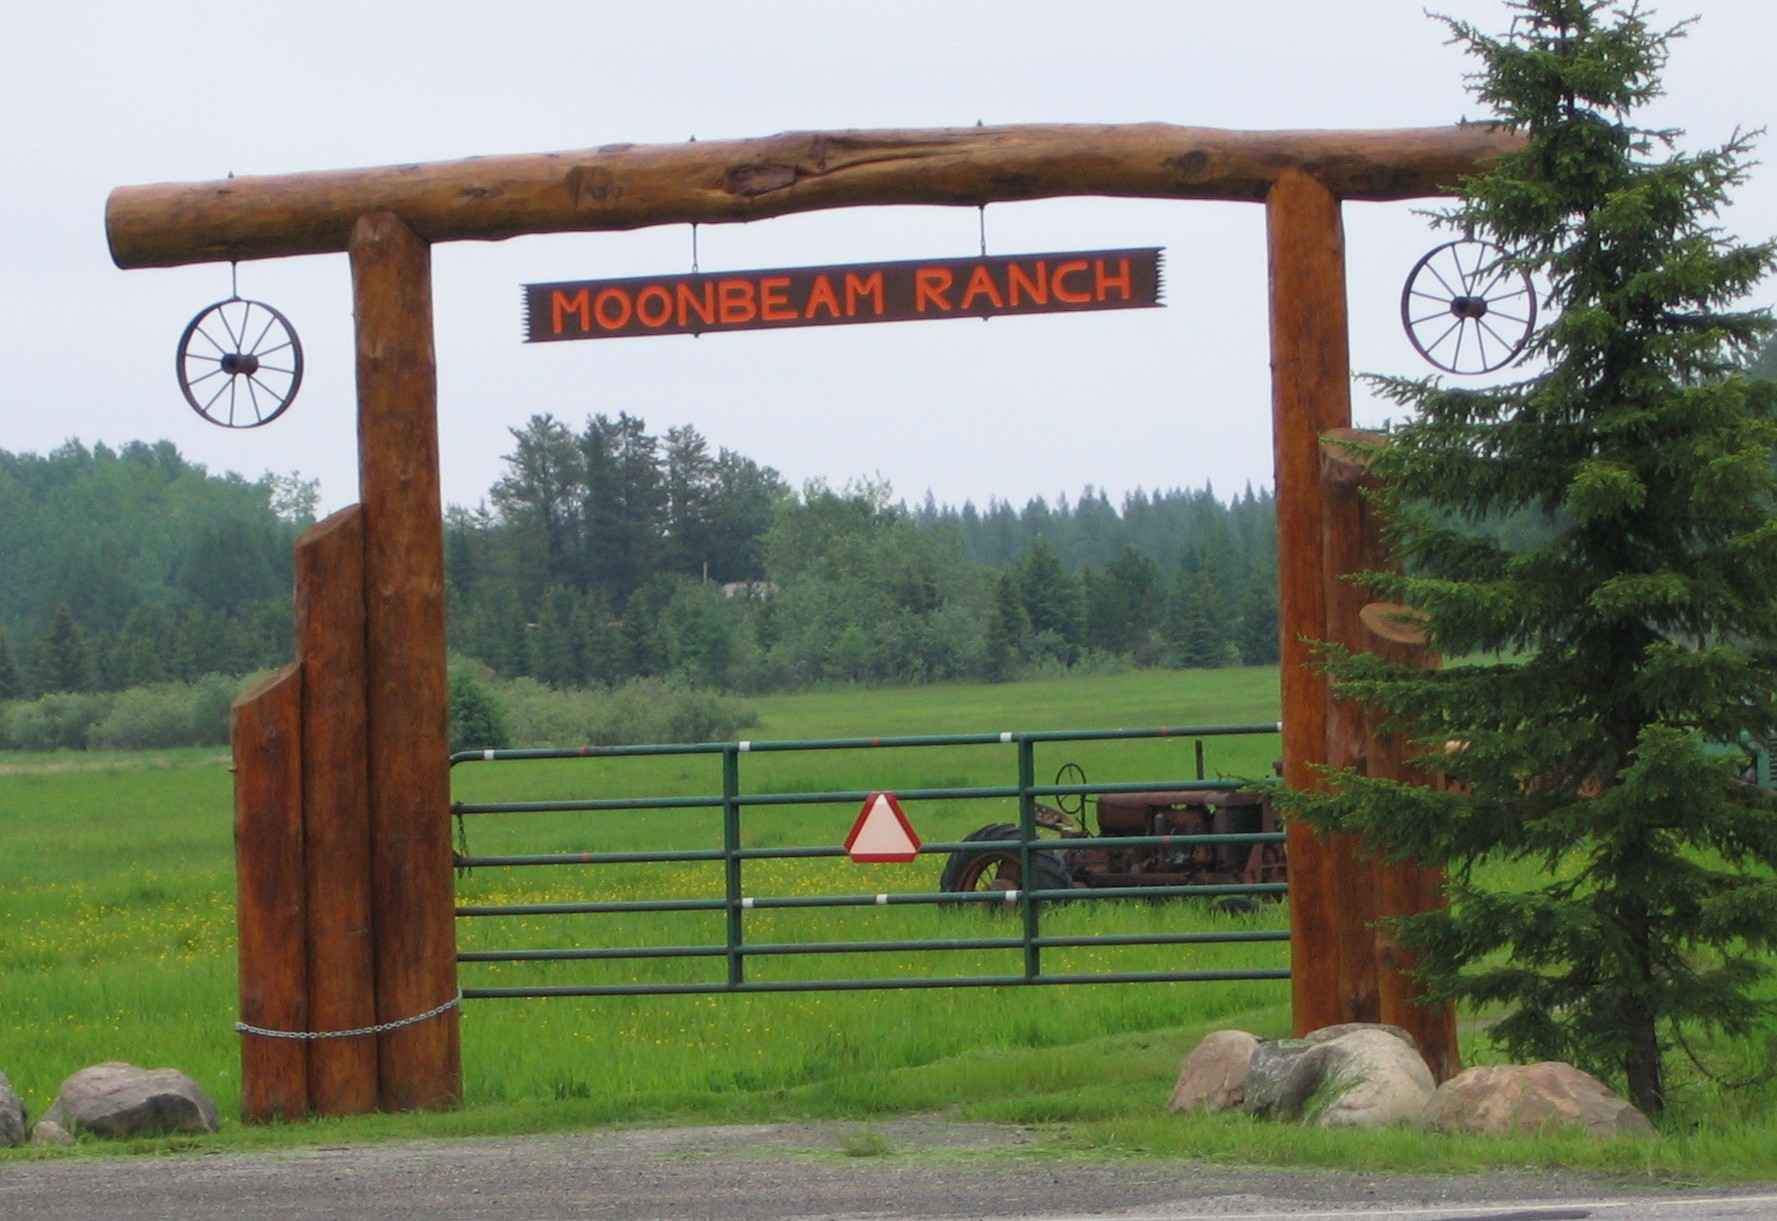 Moonbeam Ranch entrance arch made from timber logs